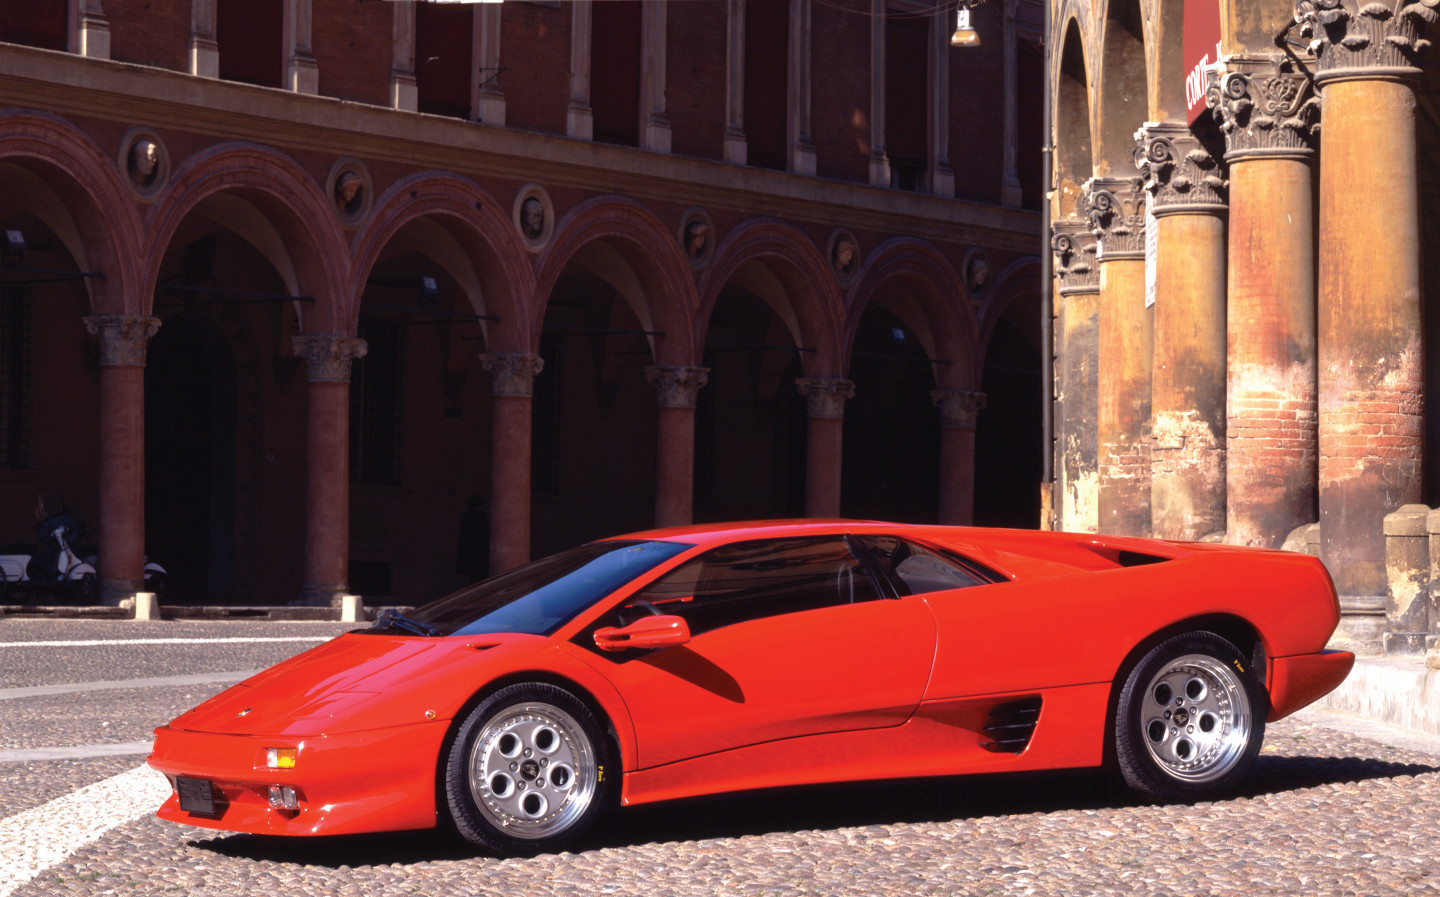 Paddy McGuinness crashed Lamborghini Diablo during Top Gear filming